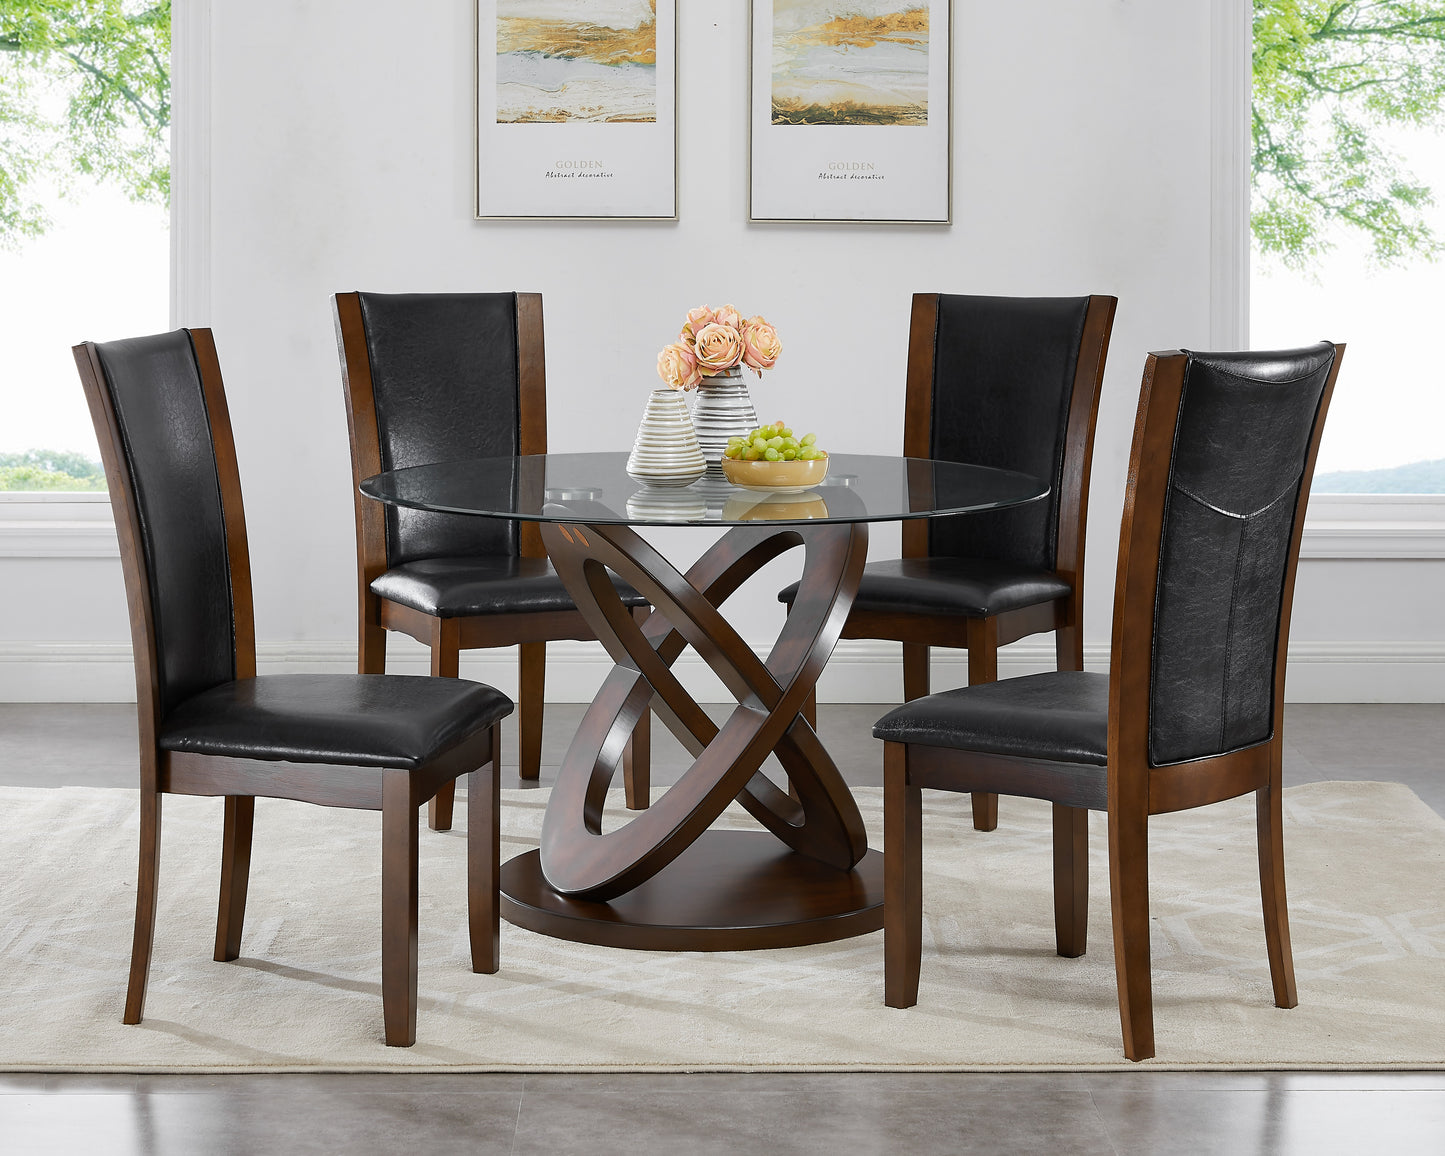 Cicicol Espresso 5PC Glass Top Dining Table with Chairs